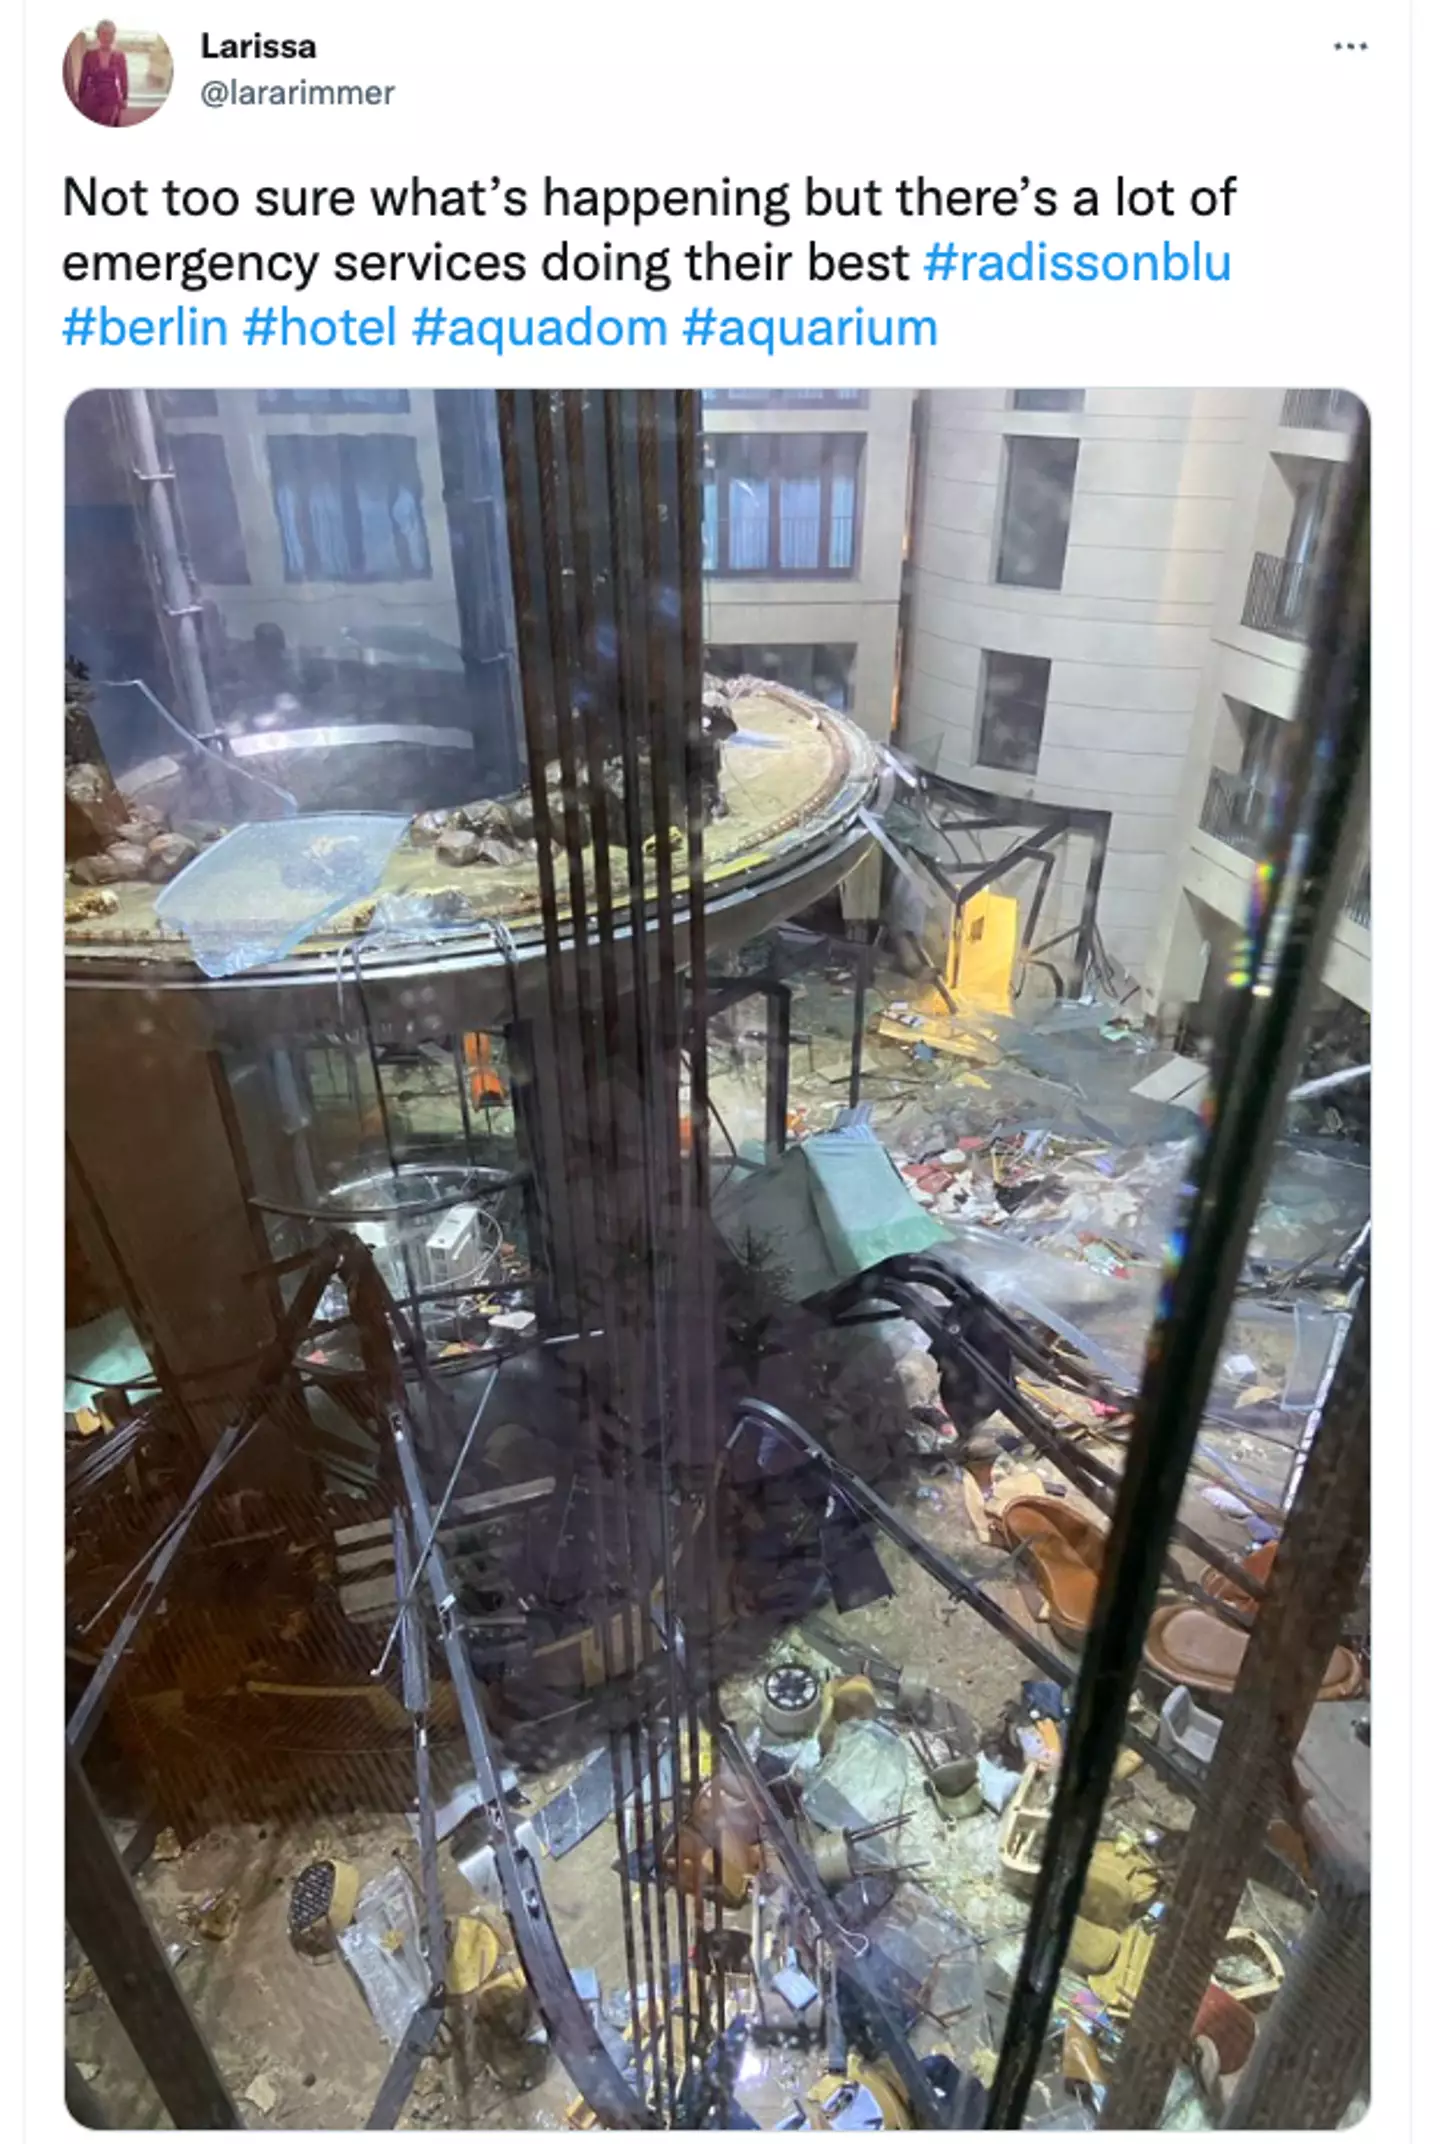 The aquarium, believed to contain up to 1,500 tropical fish, exploded at the Radisson Blu hotel in Berlin.